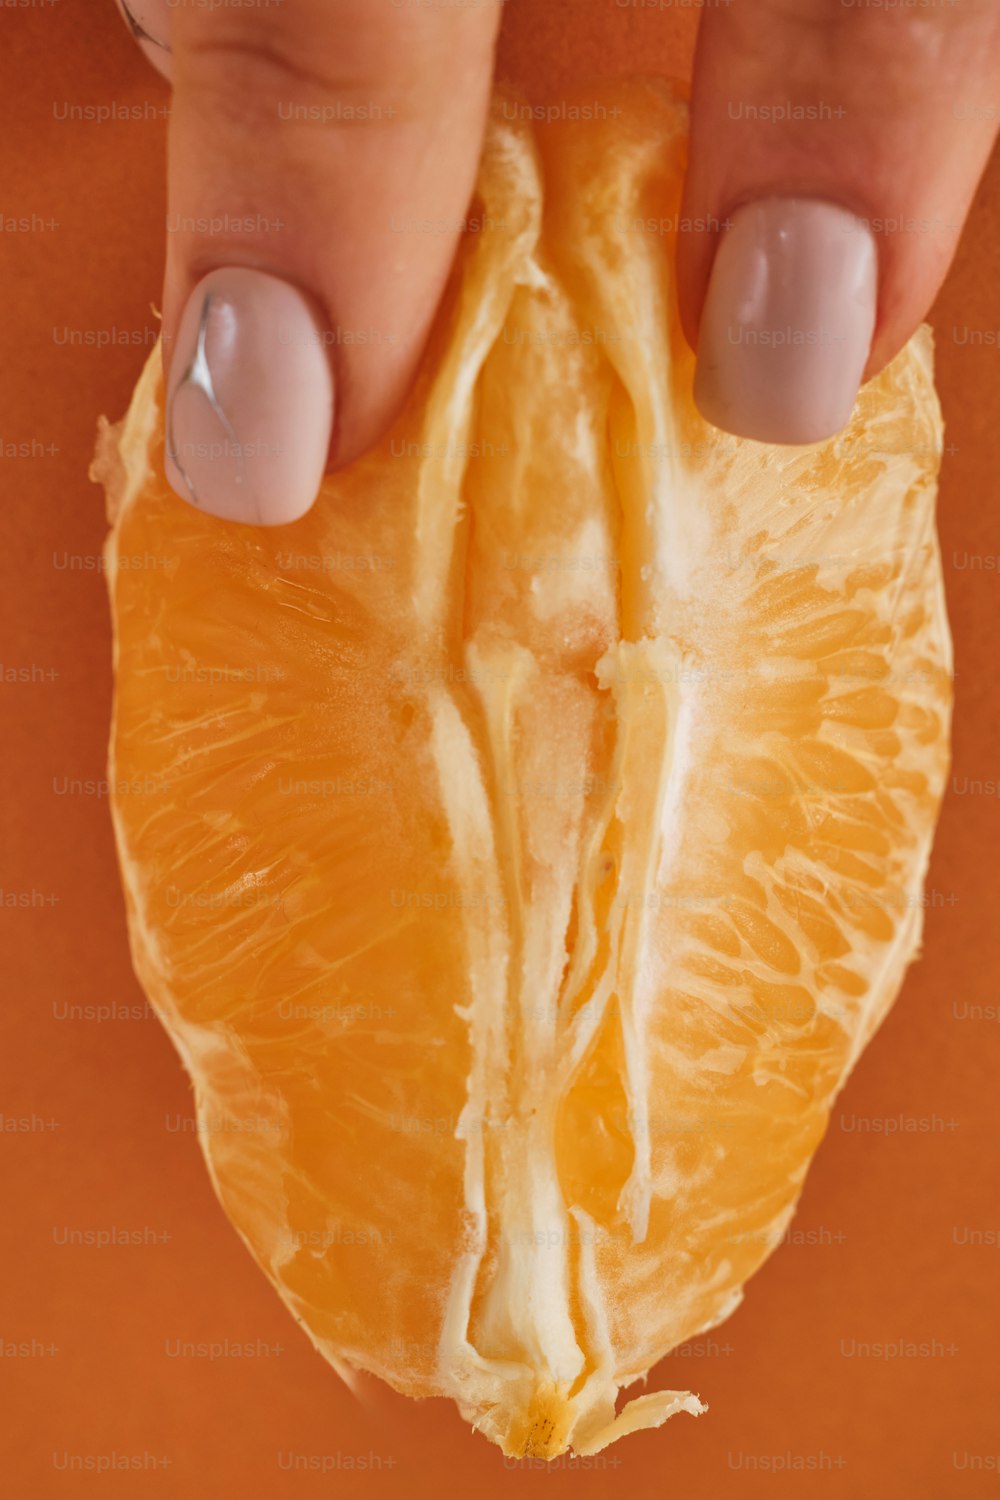 a woman's hand holding a half of an orange